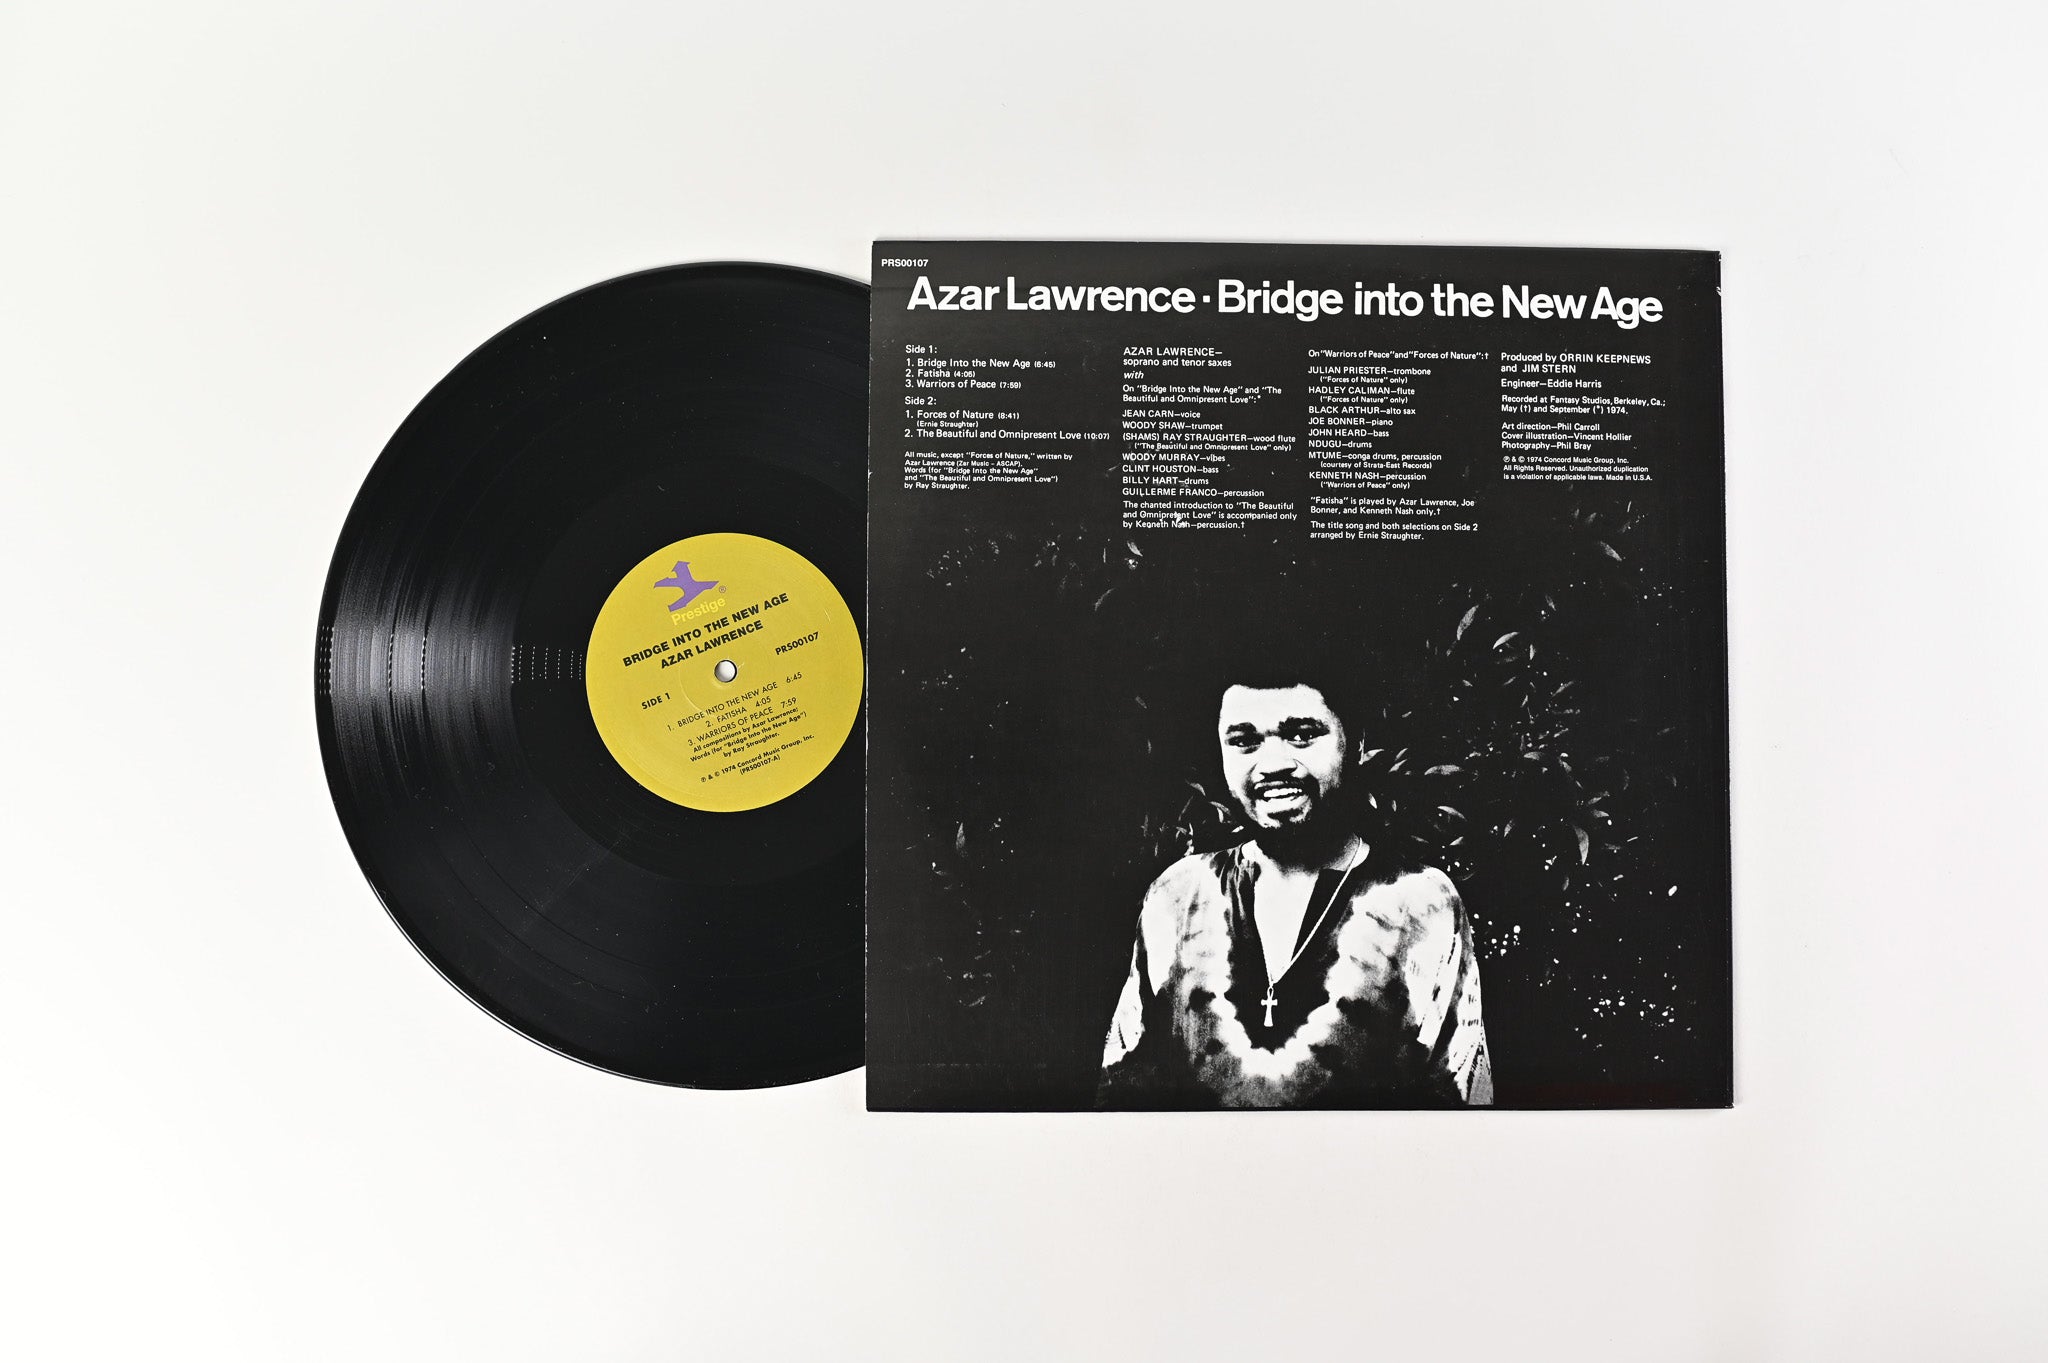 Azar Lawrence - Bridge Into The New Age Limited Reissue on Prestige